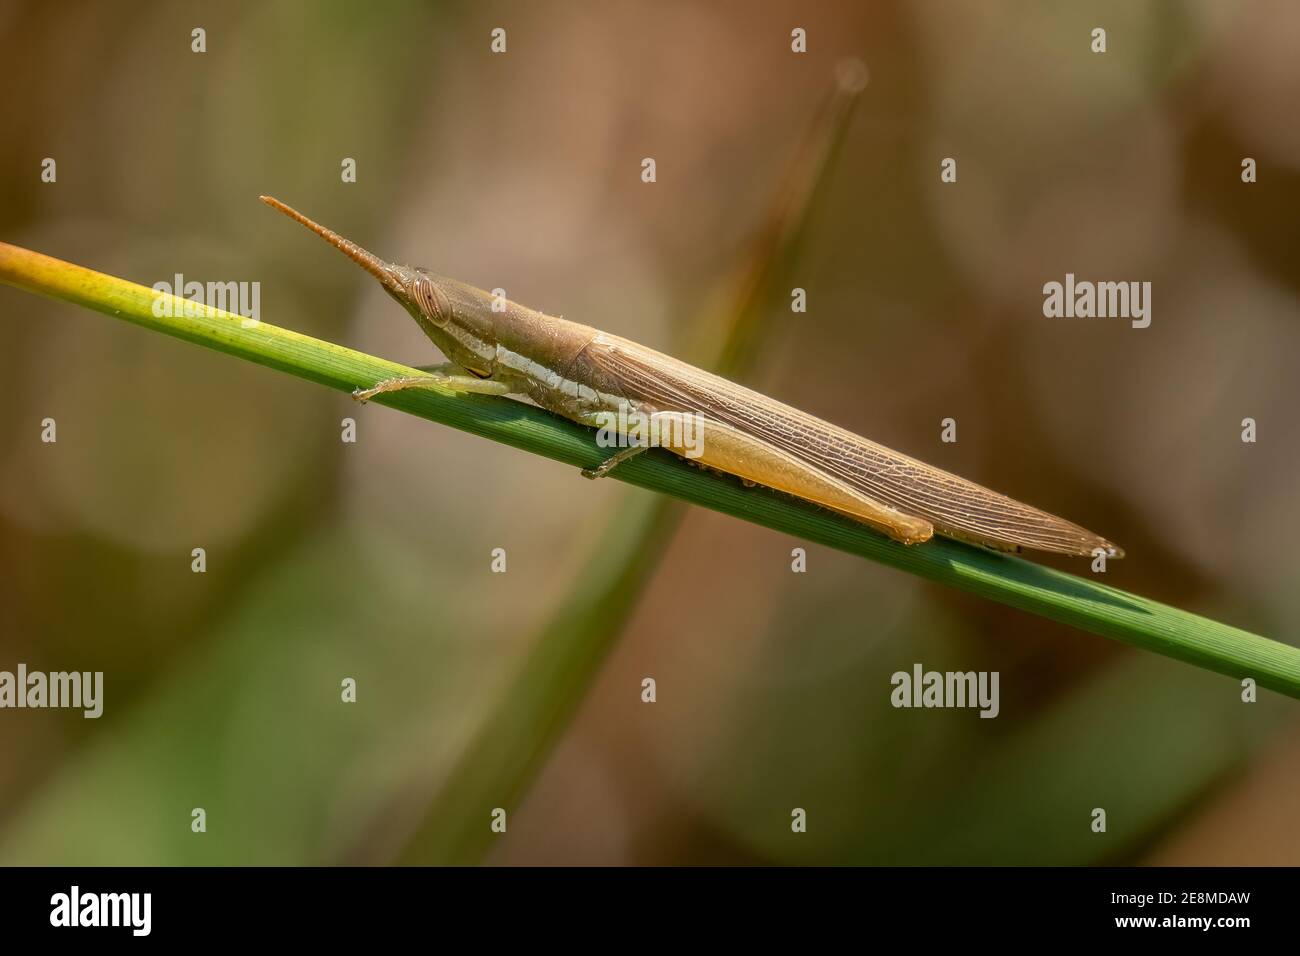 A Cattail Toothpick Grasshopper (Leptysma marginicollis) clings to a green stem. Raleigh, North Carolina. Stock Photo